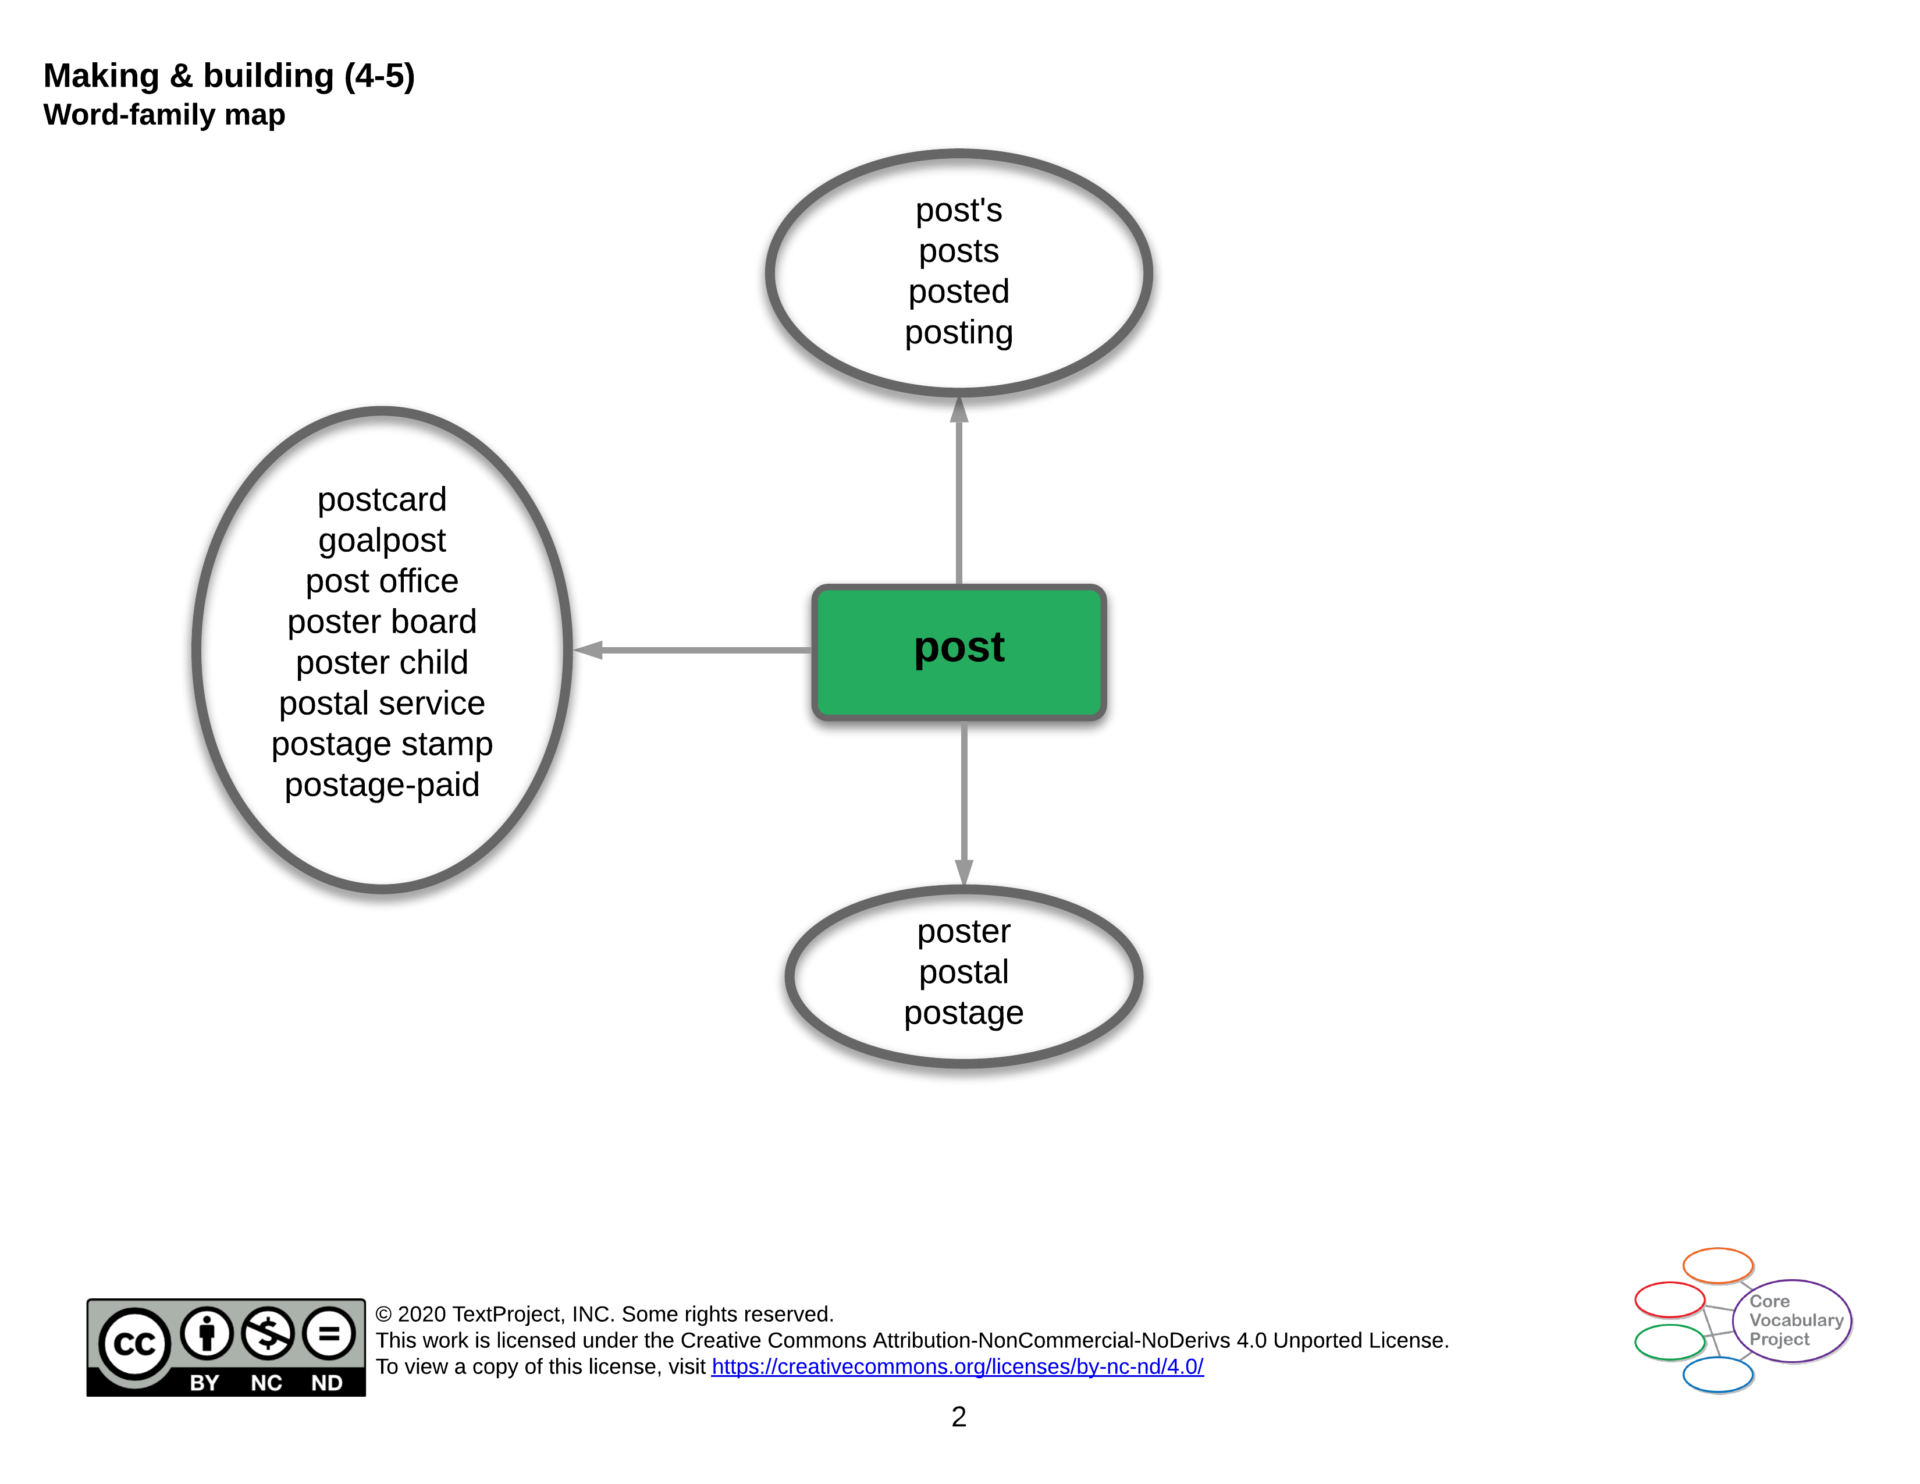 Making-and-building-CVC-GR4-5-post.png